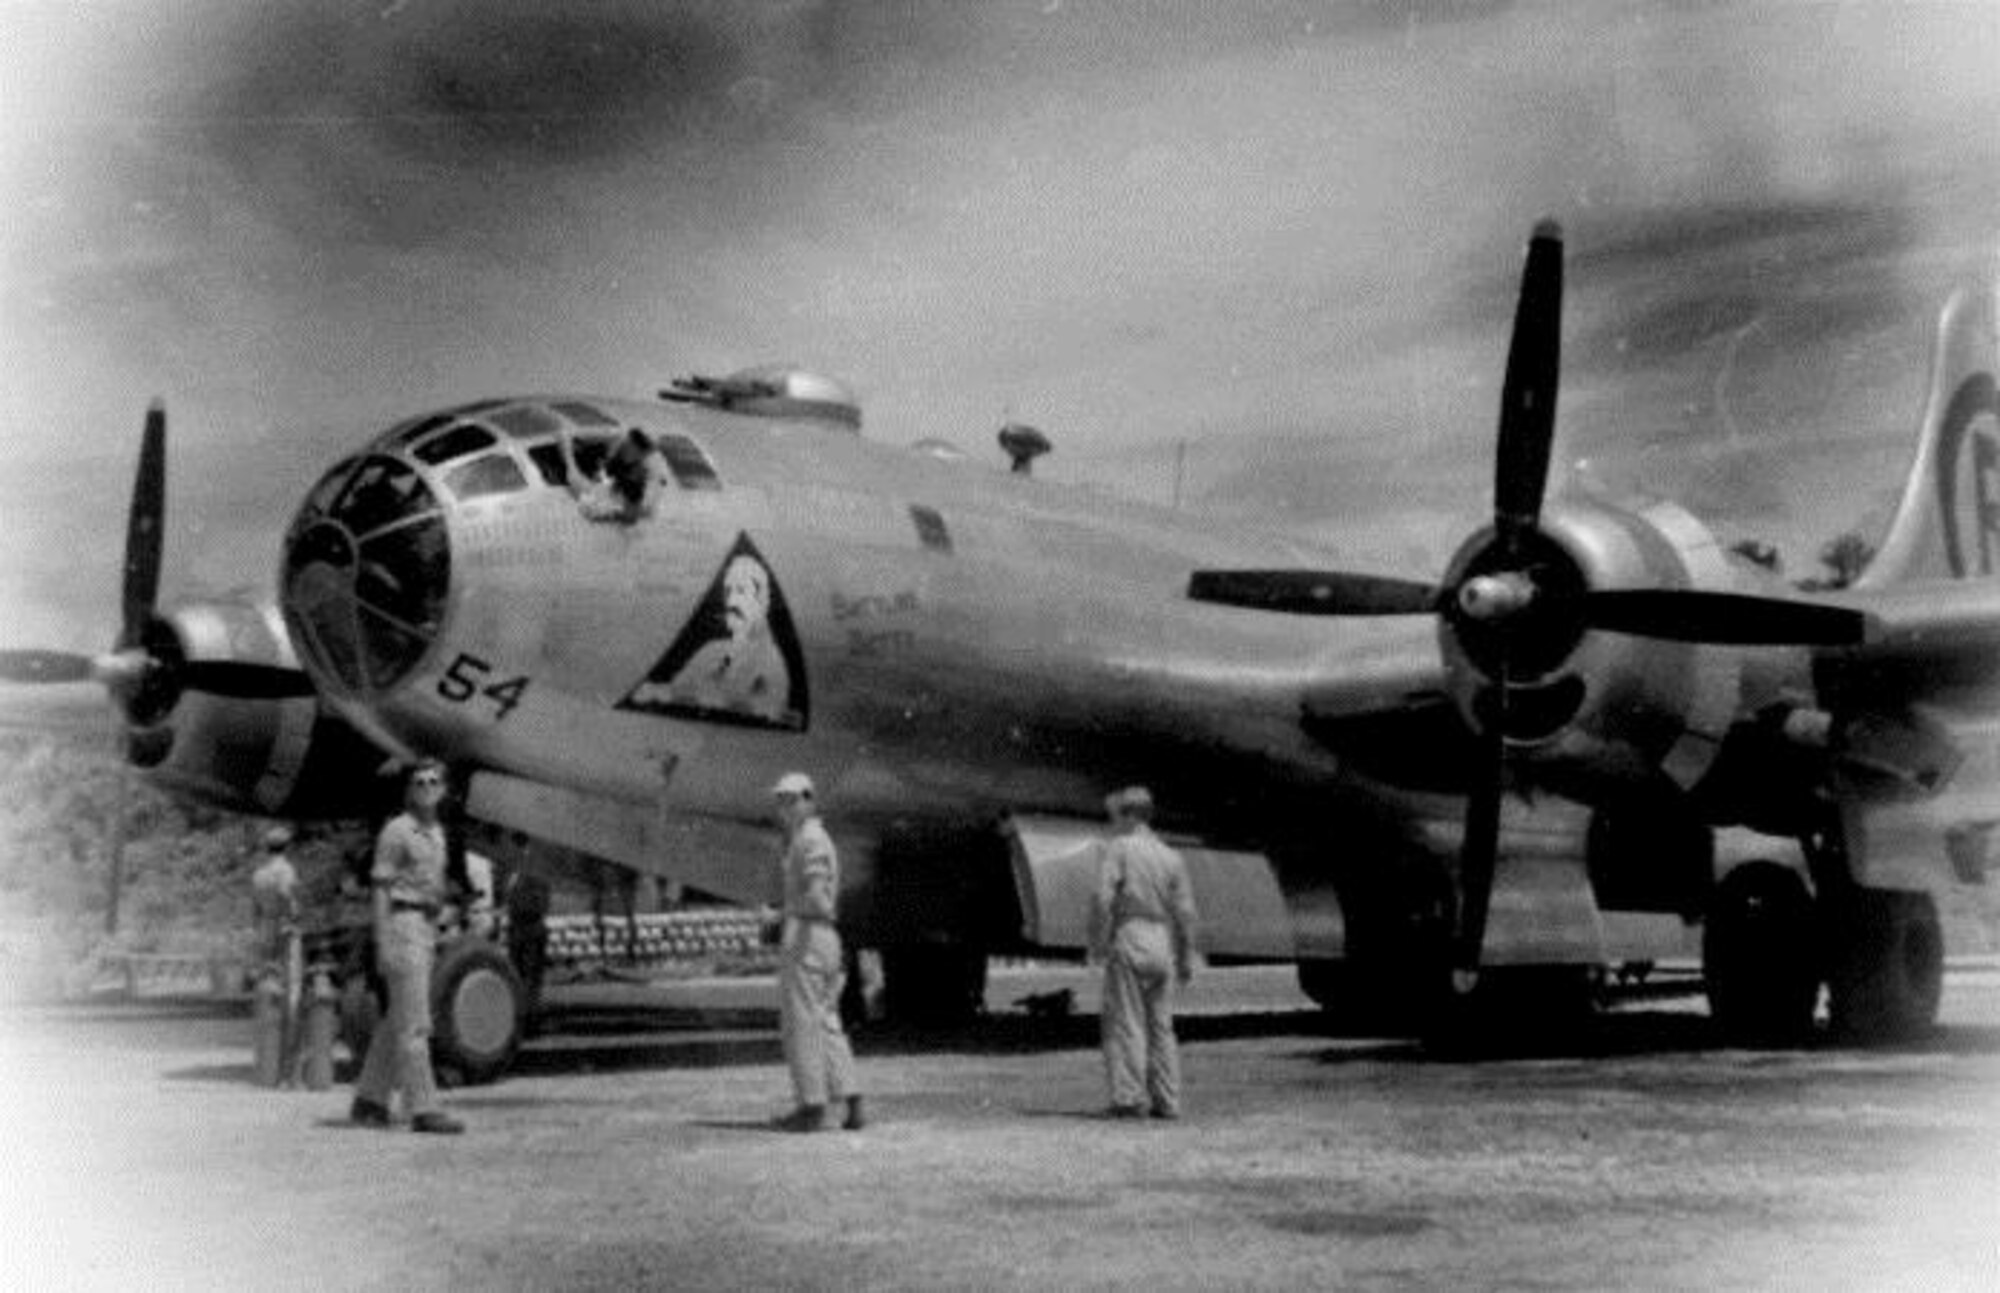 Flight Engineer Morgan flew some of his 19 combat missions with Crew # 40r2 aboard Victor 54, also known as “Battling Betty,” a B-29-65-BW Superfortress, serial number 44-69847 assigned to the 40th Bomb Squadron.  (Courtesy Mr. Mark Furman, via 6th Bomb Group Association)